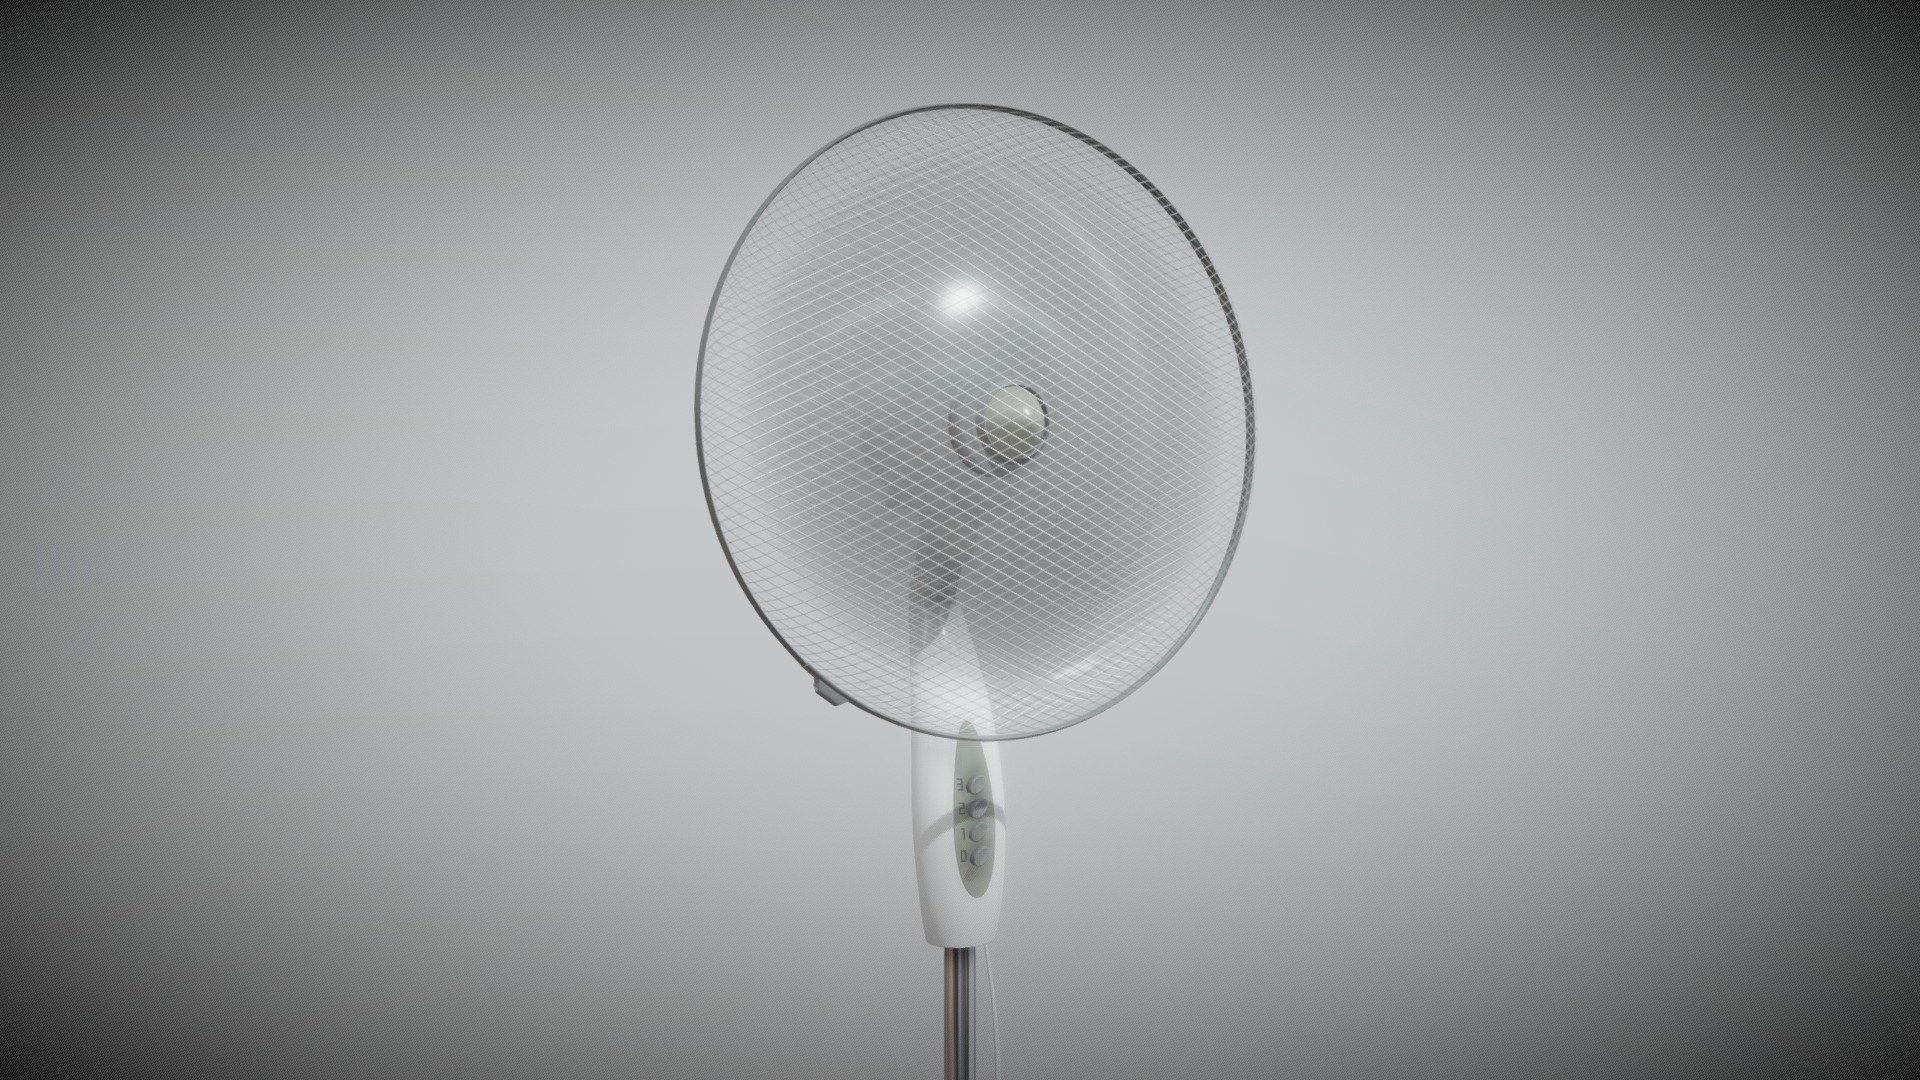 I modeled this interior fan in order to enrich my gallery with a work in high-poly and to play with real-time motion blur.

It's inspired by a real model I have in my home but, obviously, without the camera !

The idea of adding this &ldquo;option